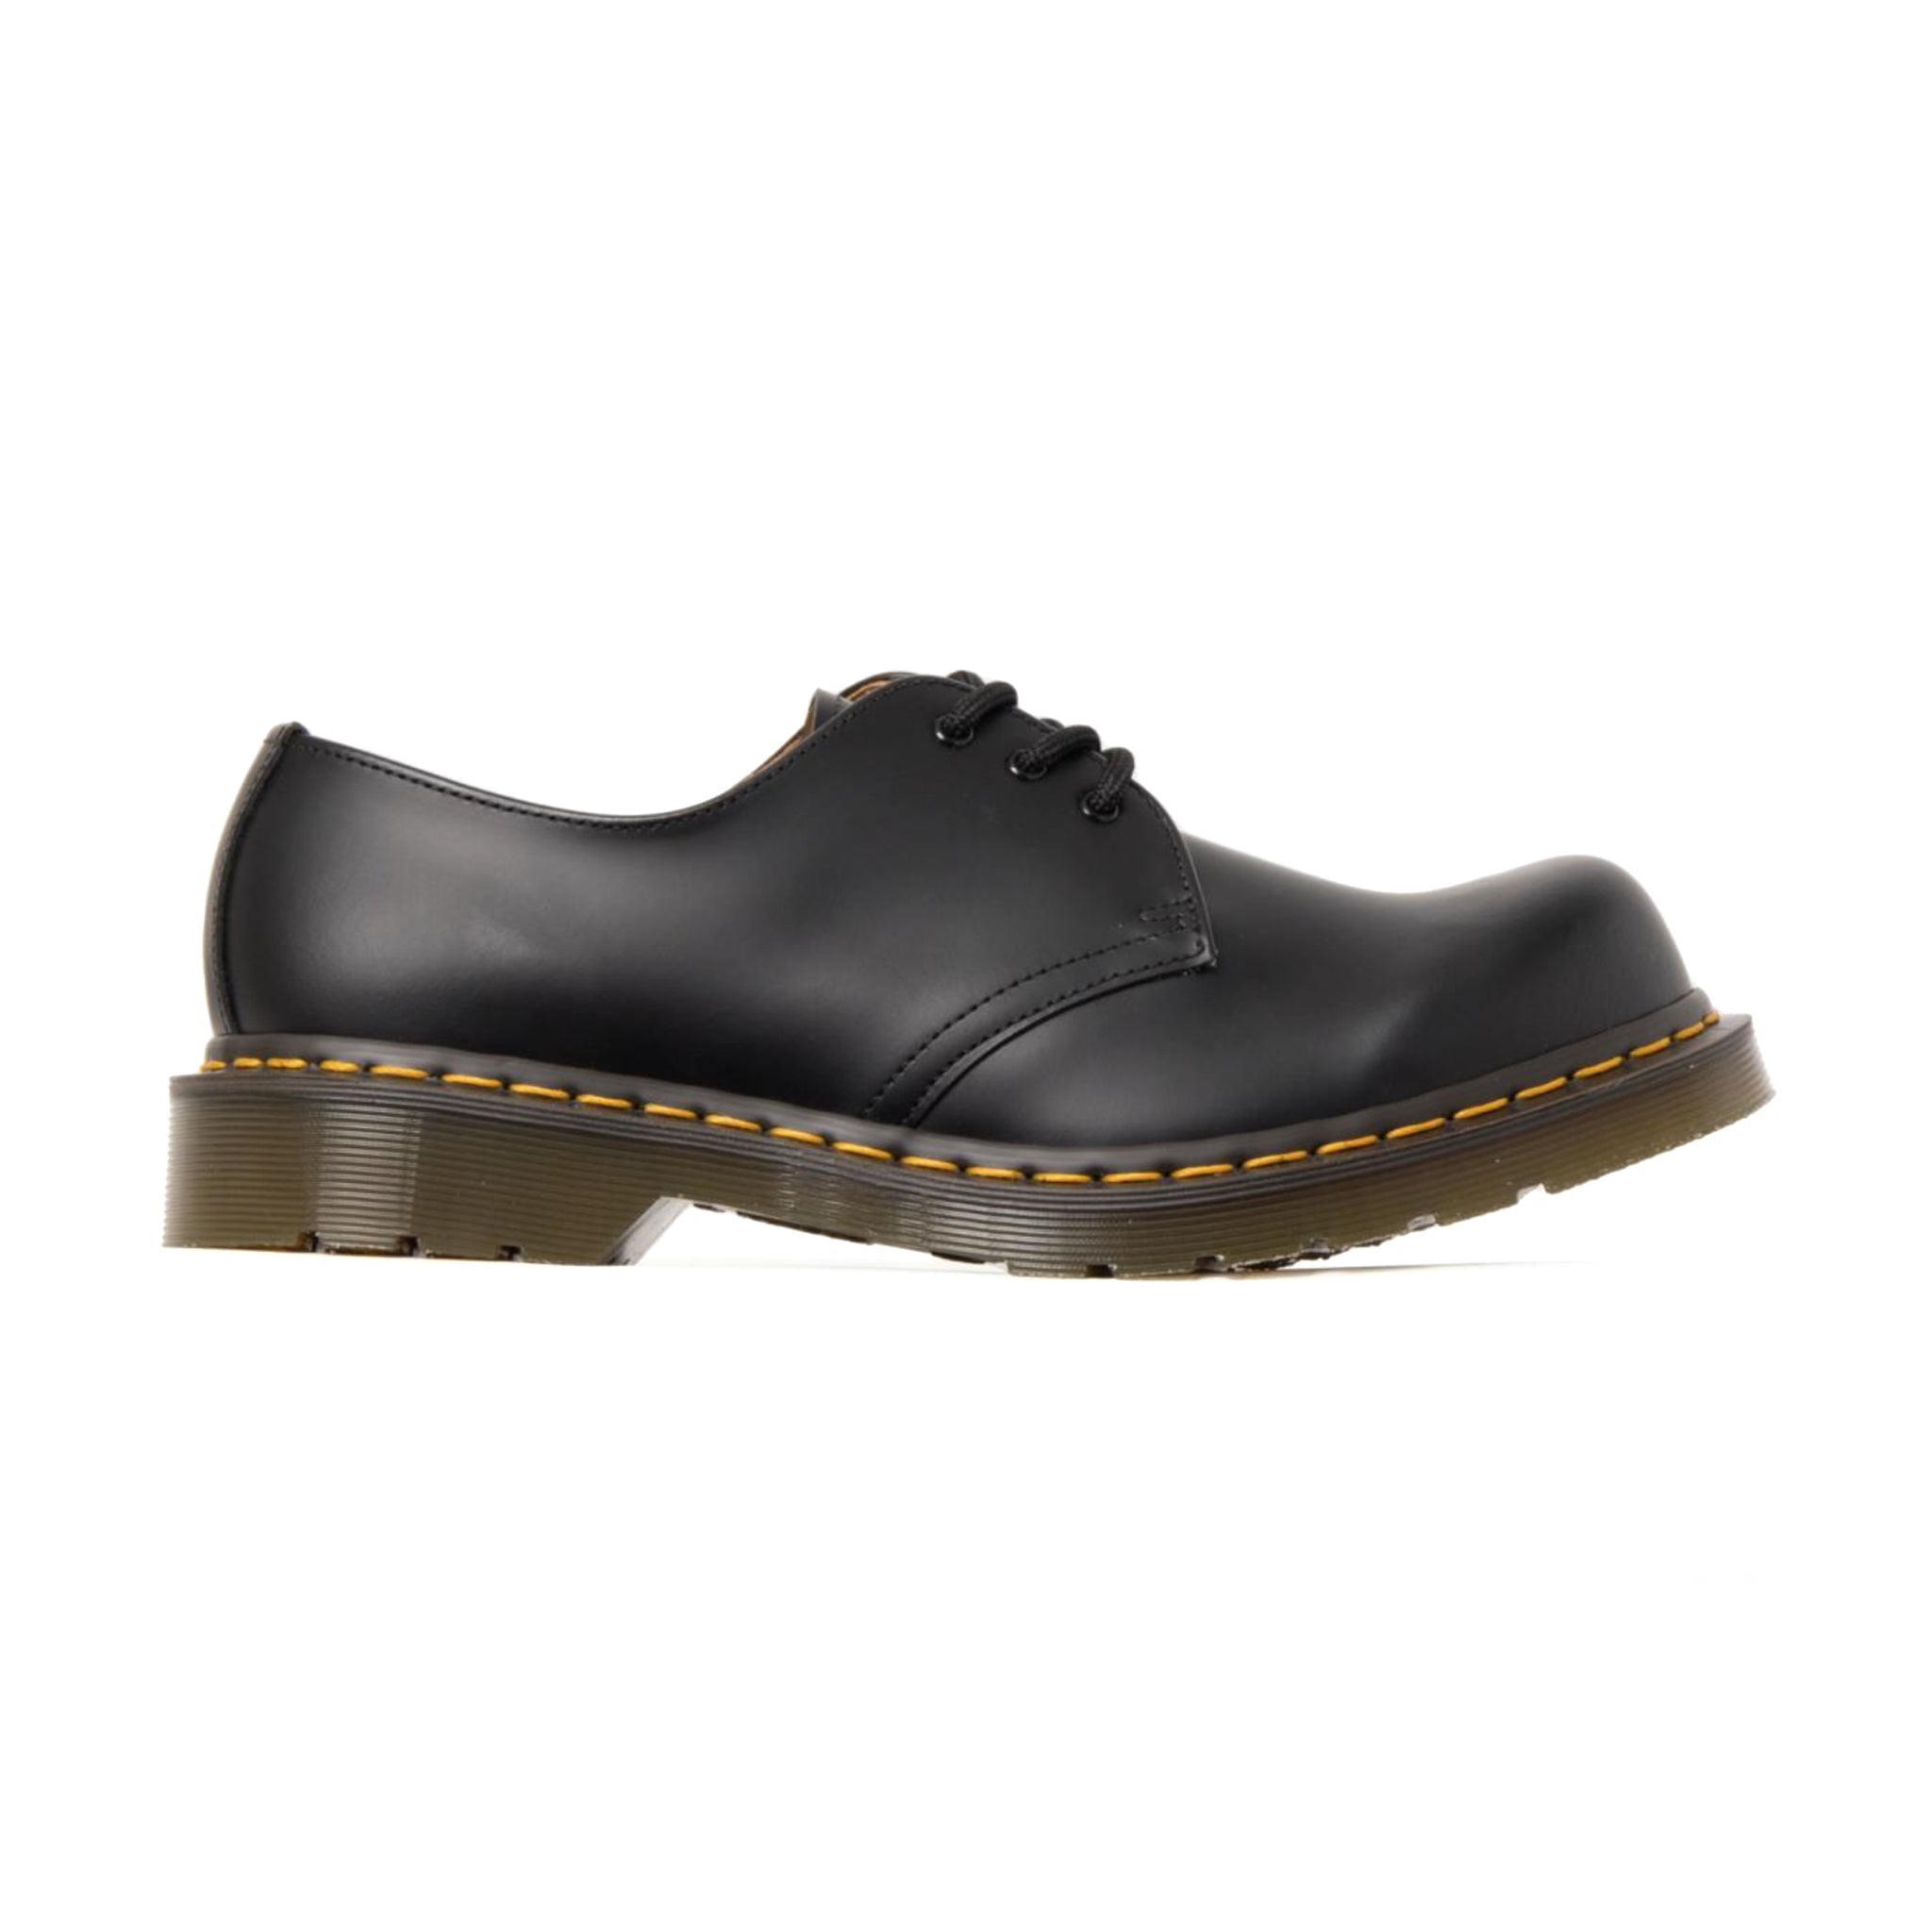 HDTB x Dr Martens Leather Lace Up Black